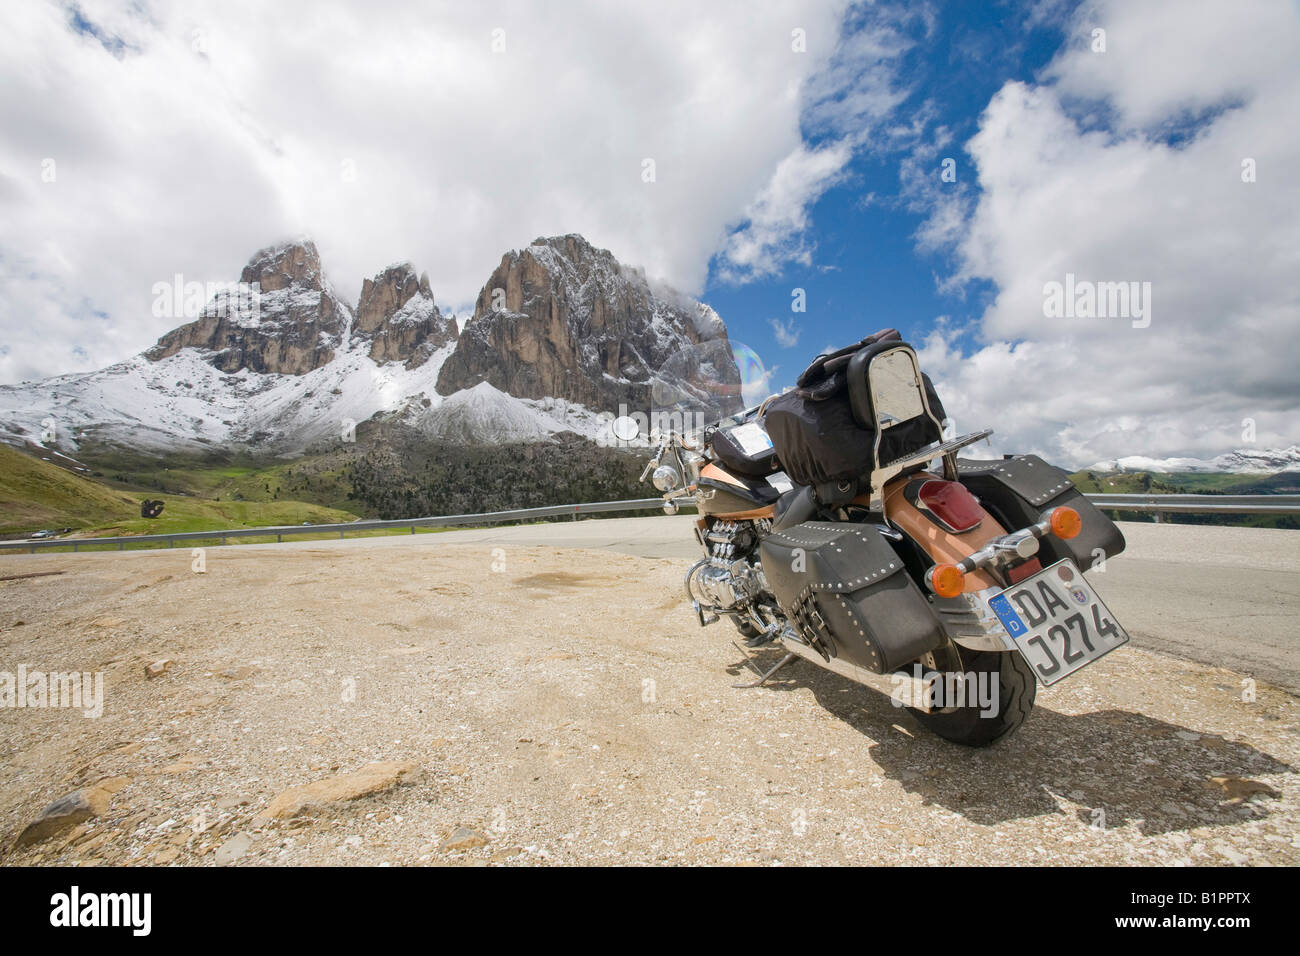 A Motorbike on the summit of the Sella Joch pass in the Italian Dolomites with mountain view behind Stock Photo